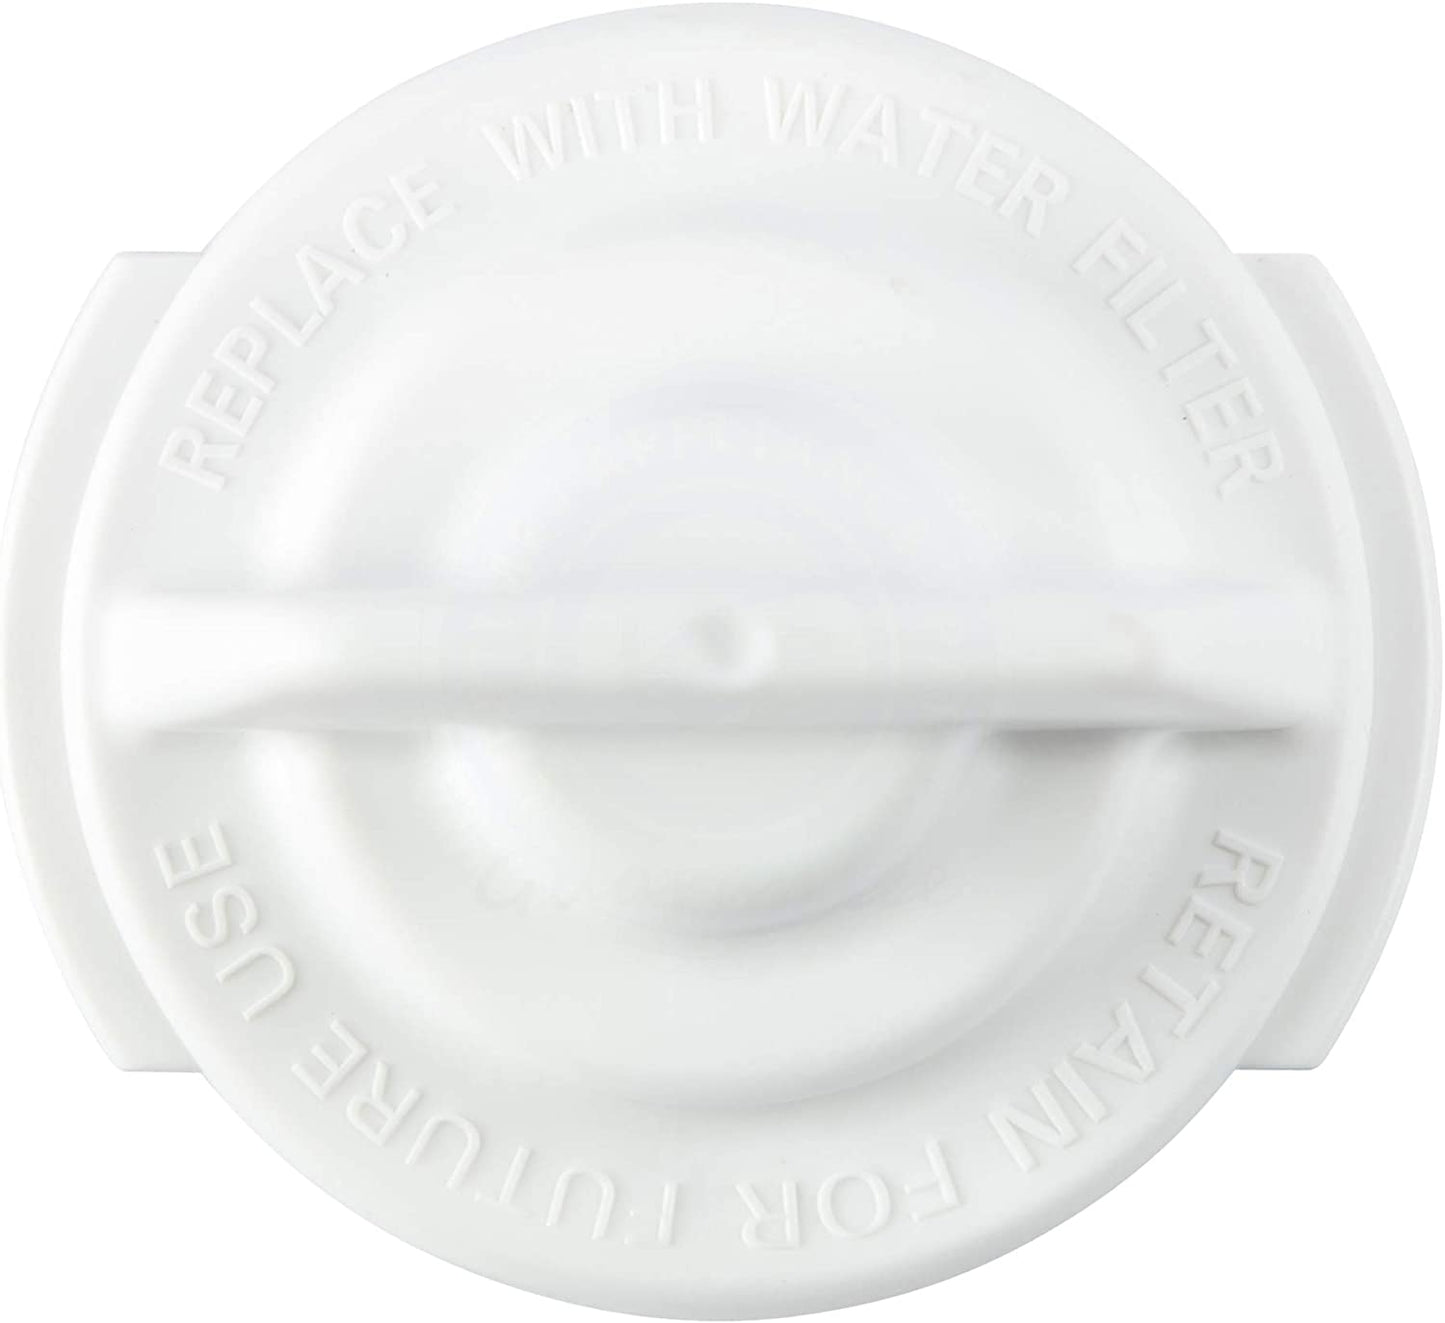 WR02X11705 Filter Bypass Cap Compatible with General Electric (GE) Refrigerator - WR17X22070